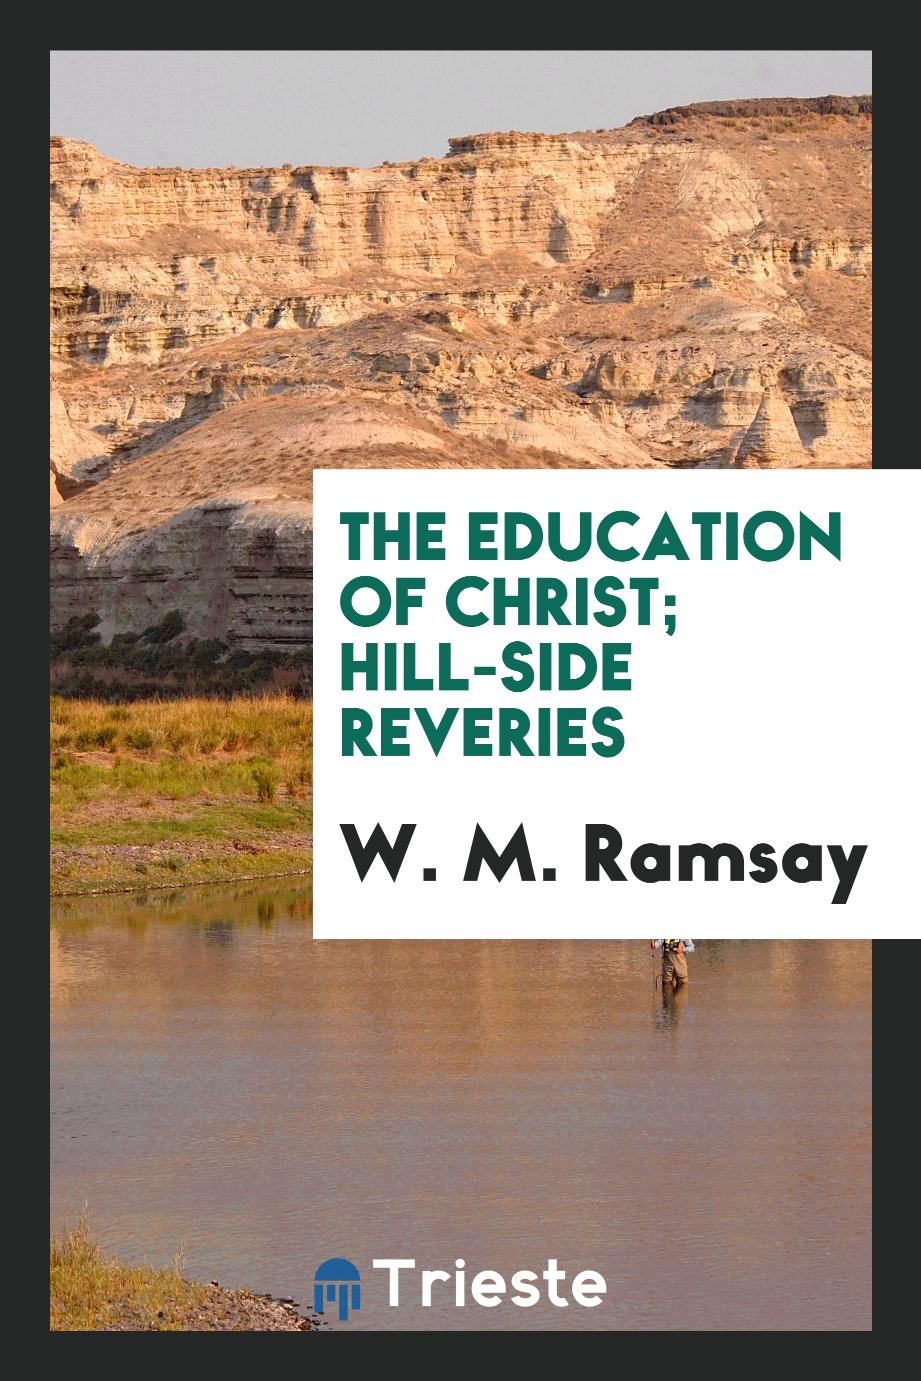 The education of Christ; hill-side reveries